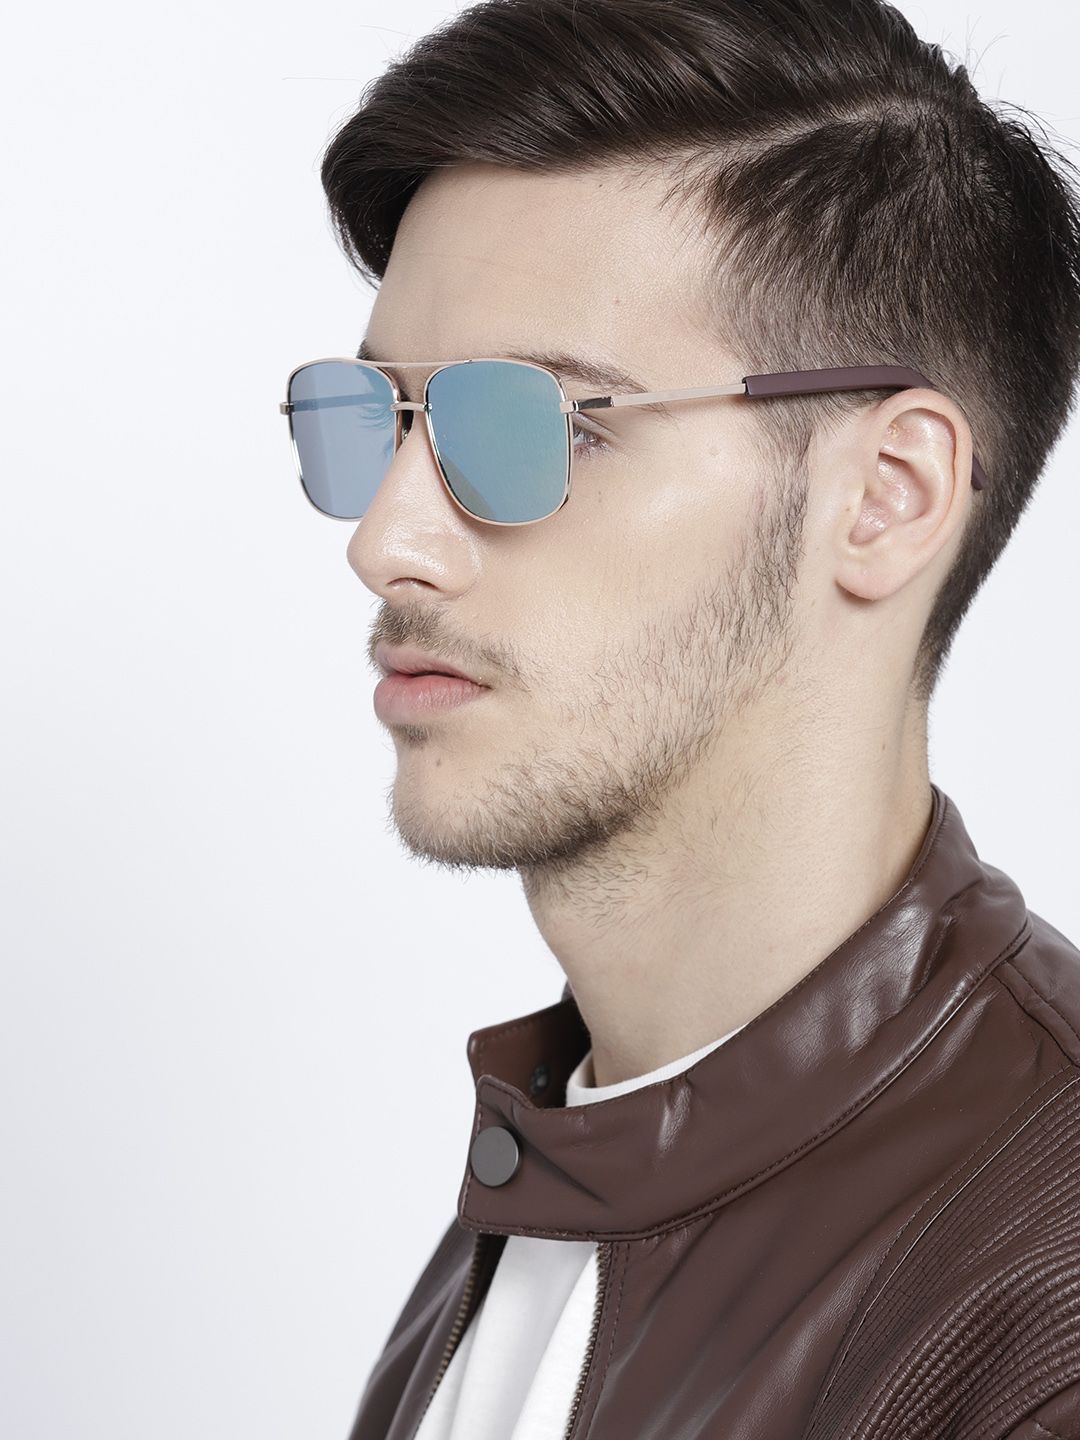 Roadster Unisex Mirrored Rectangle Sunglasses MFB-PN-PS-B0298 Price in India